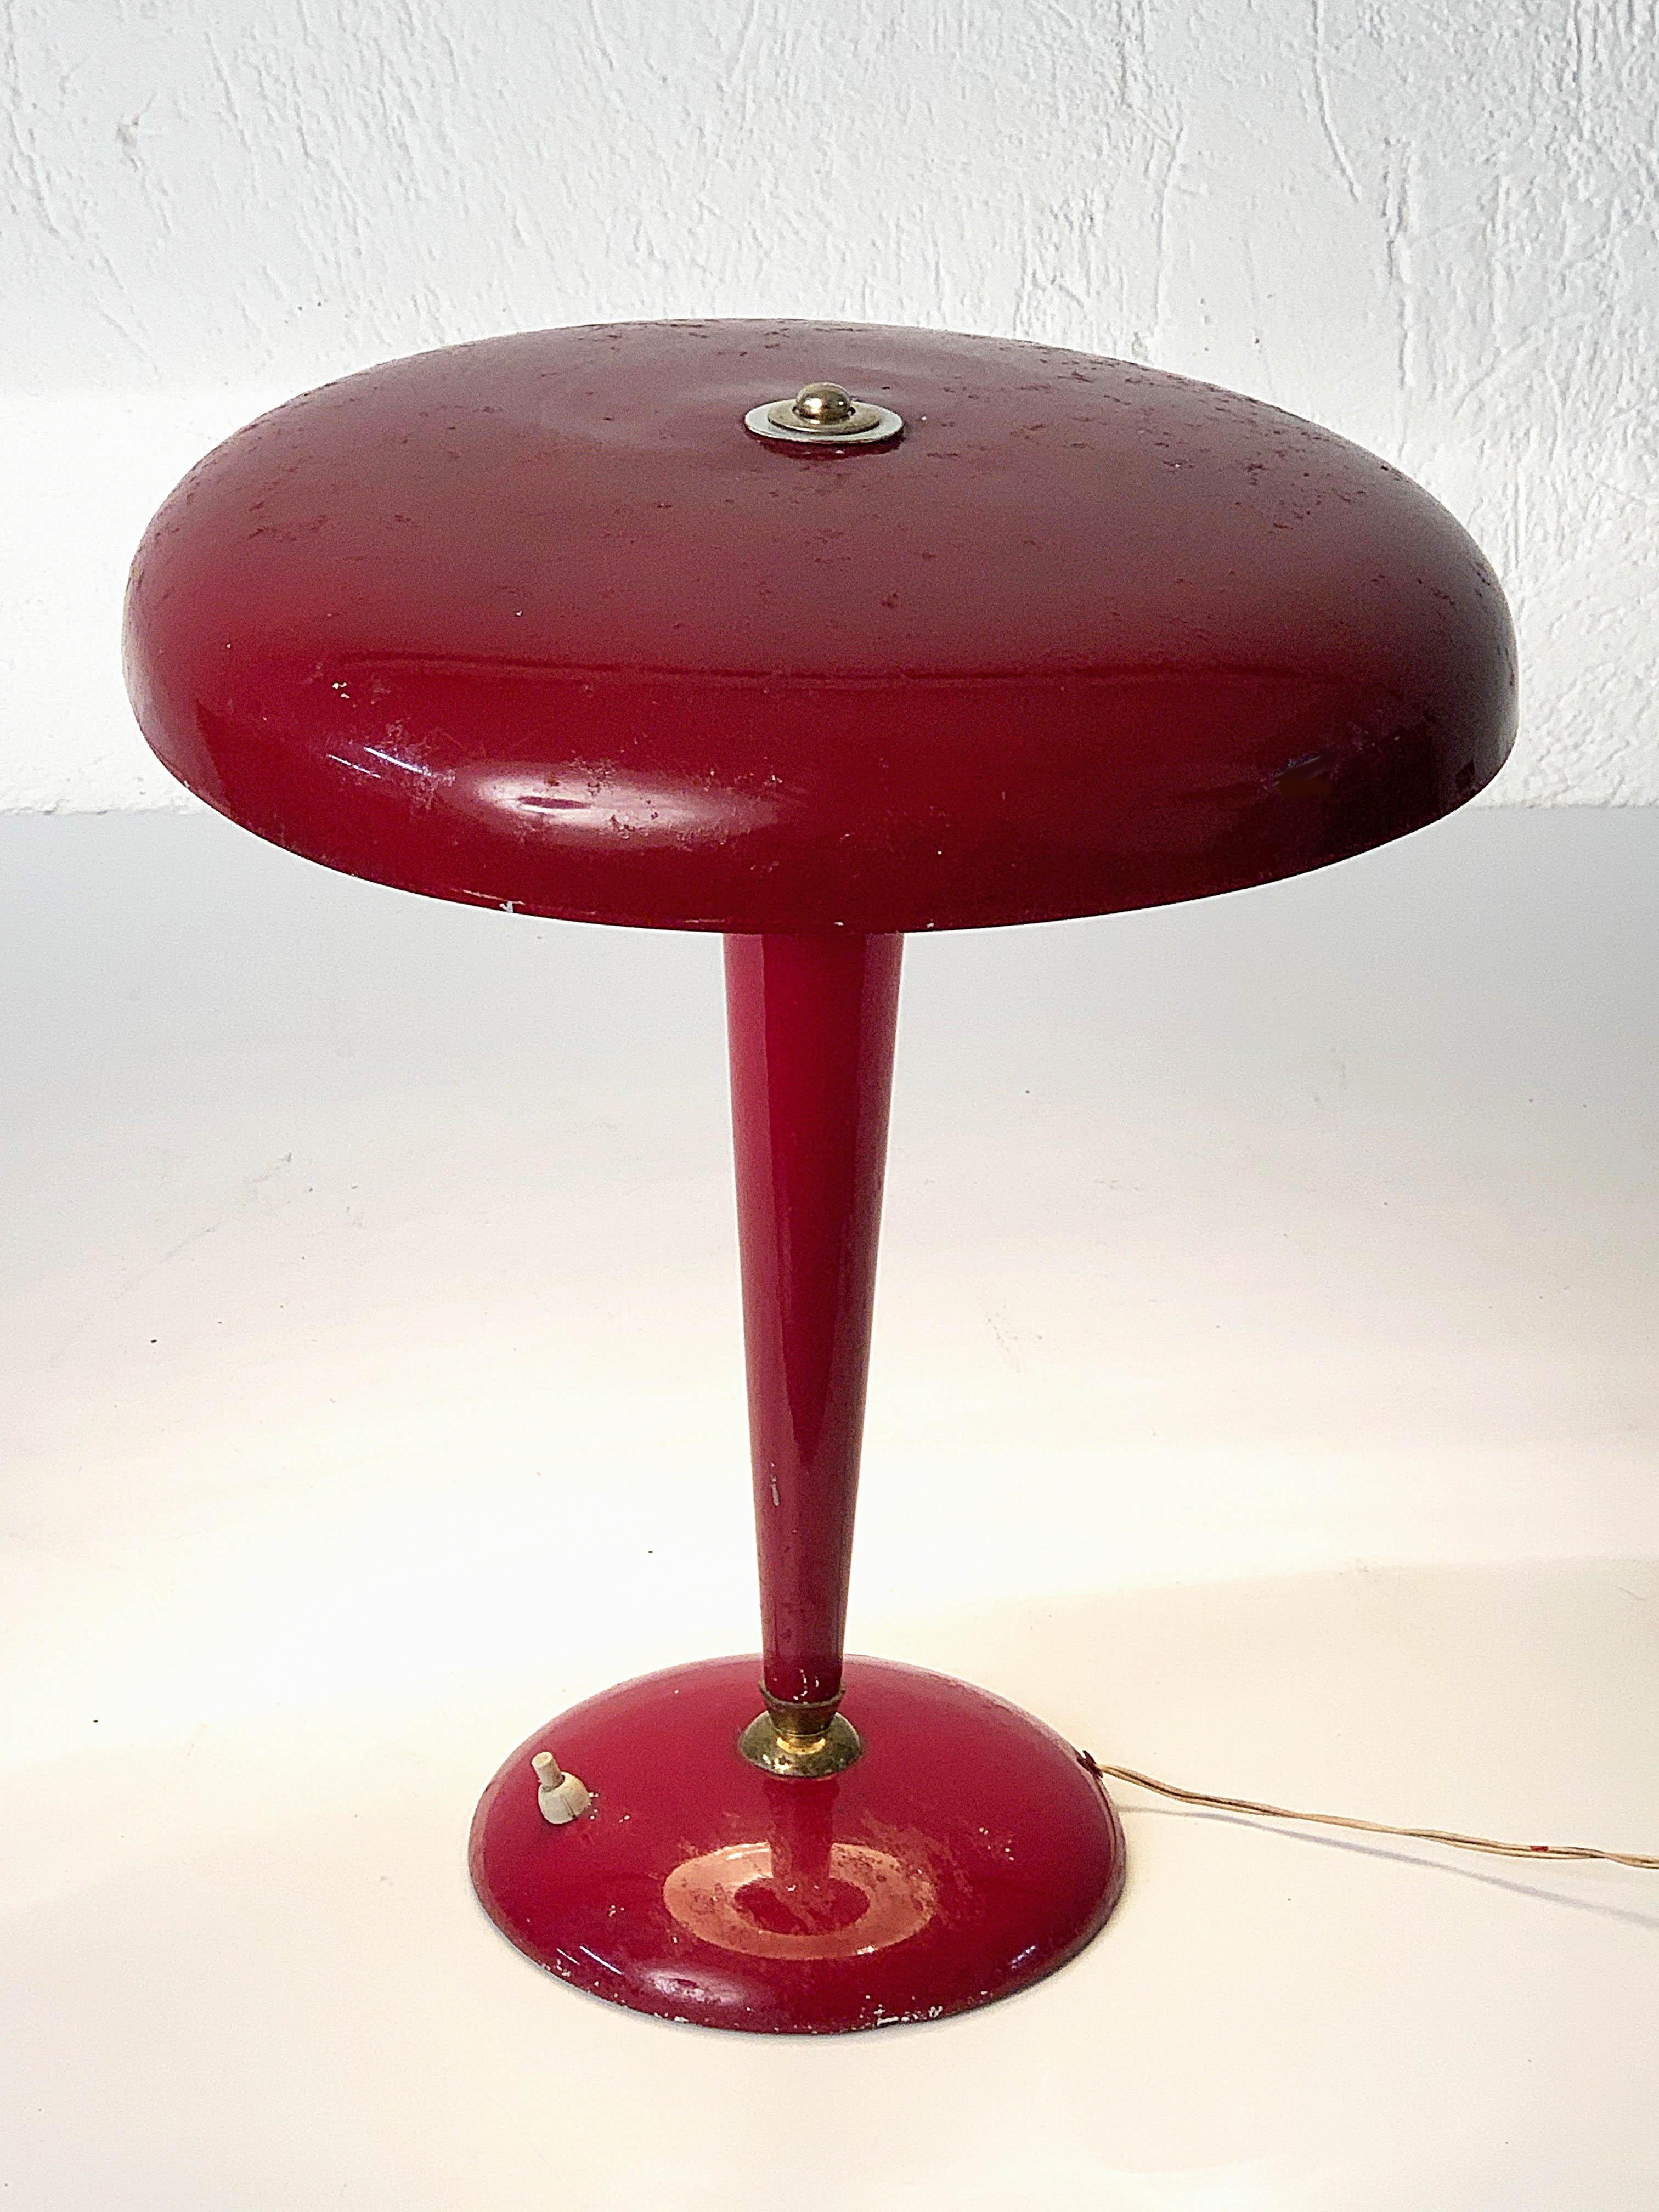 Midcentury Oscar Torlasco Red Aluminum and Brass Italian Table Lamp, 1950s For Sale 7